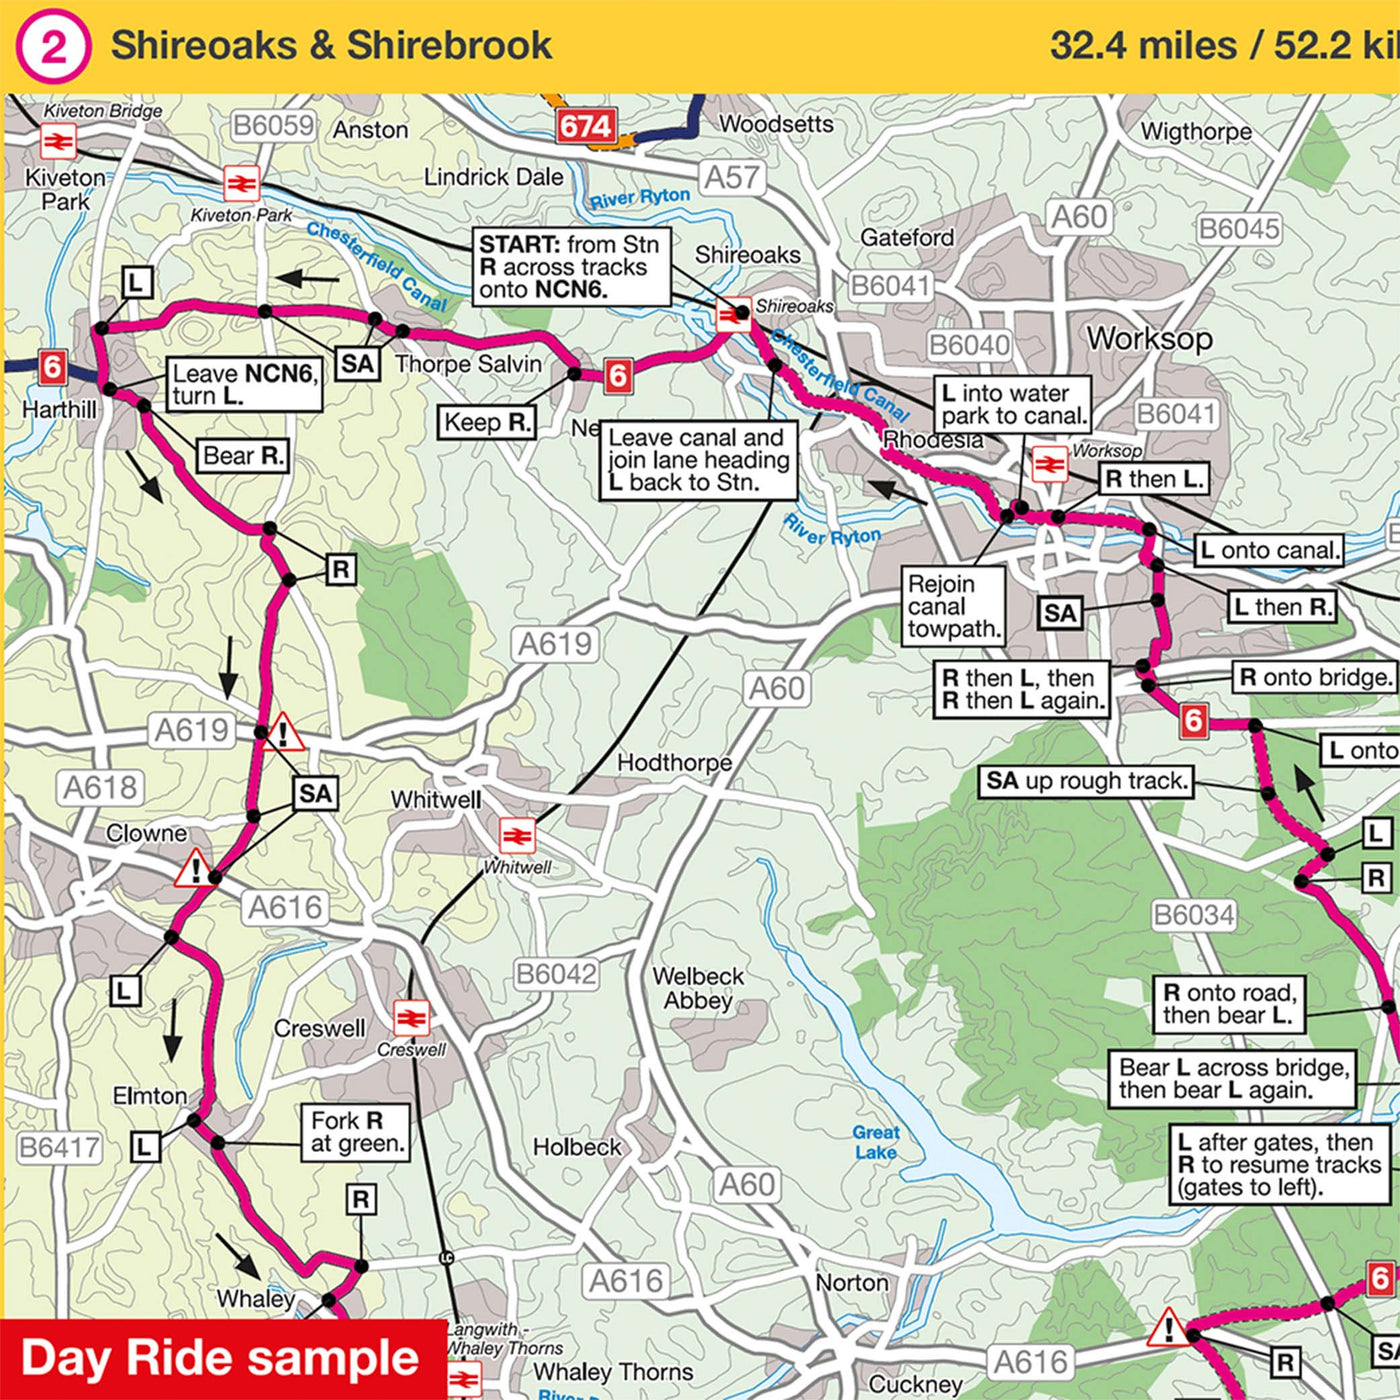 Day ride sample from Sustrans' Peak District cycle map